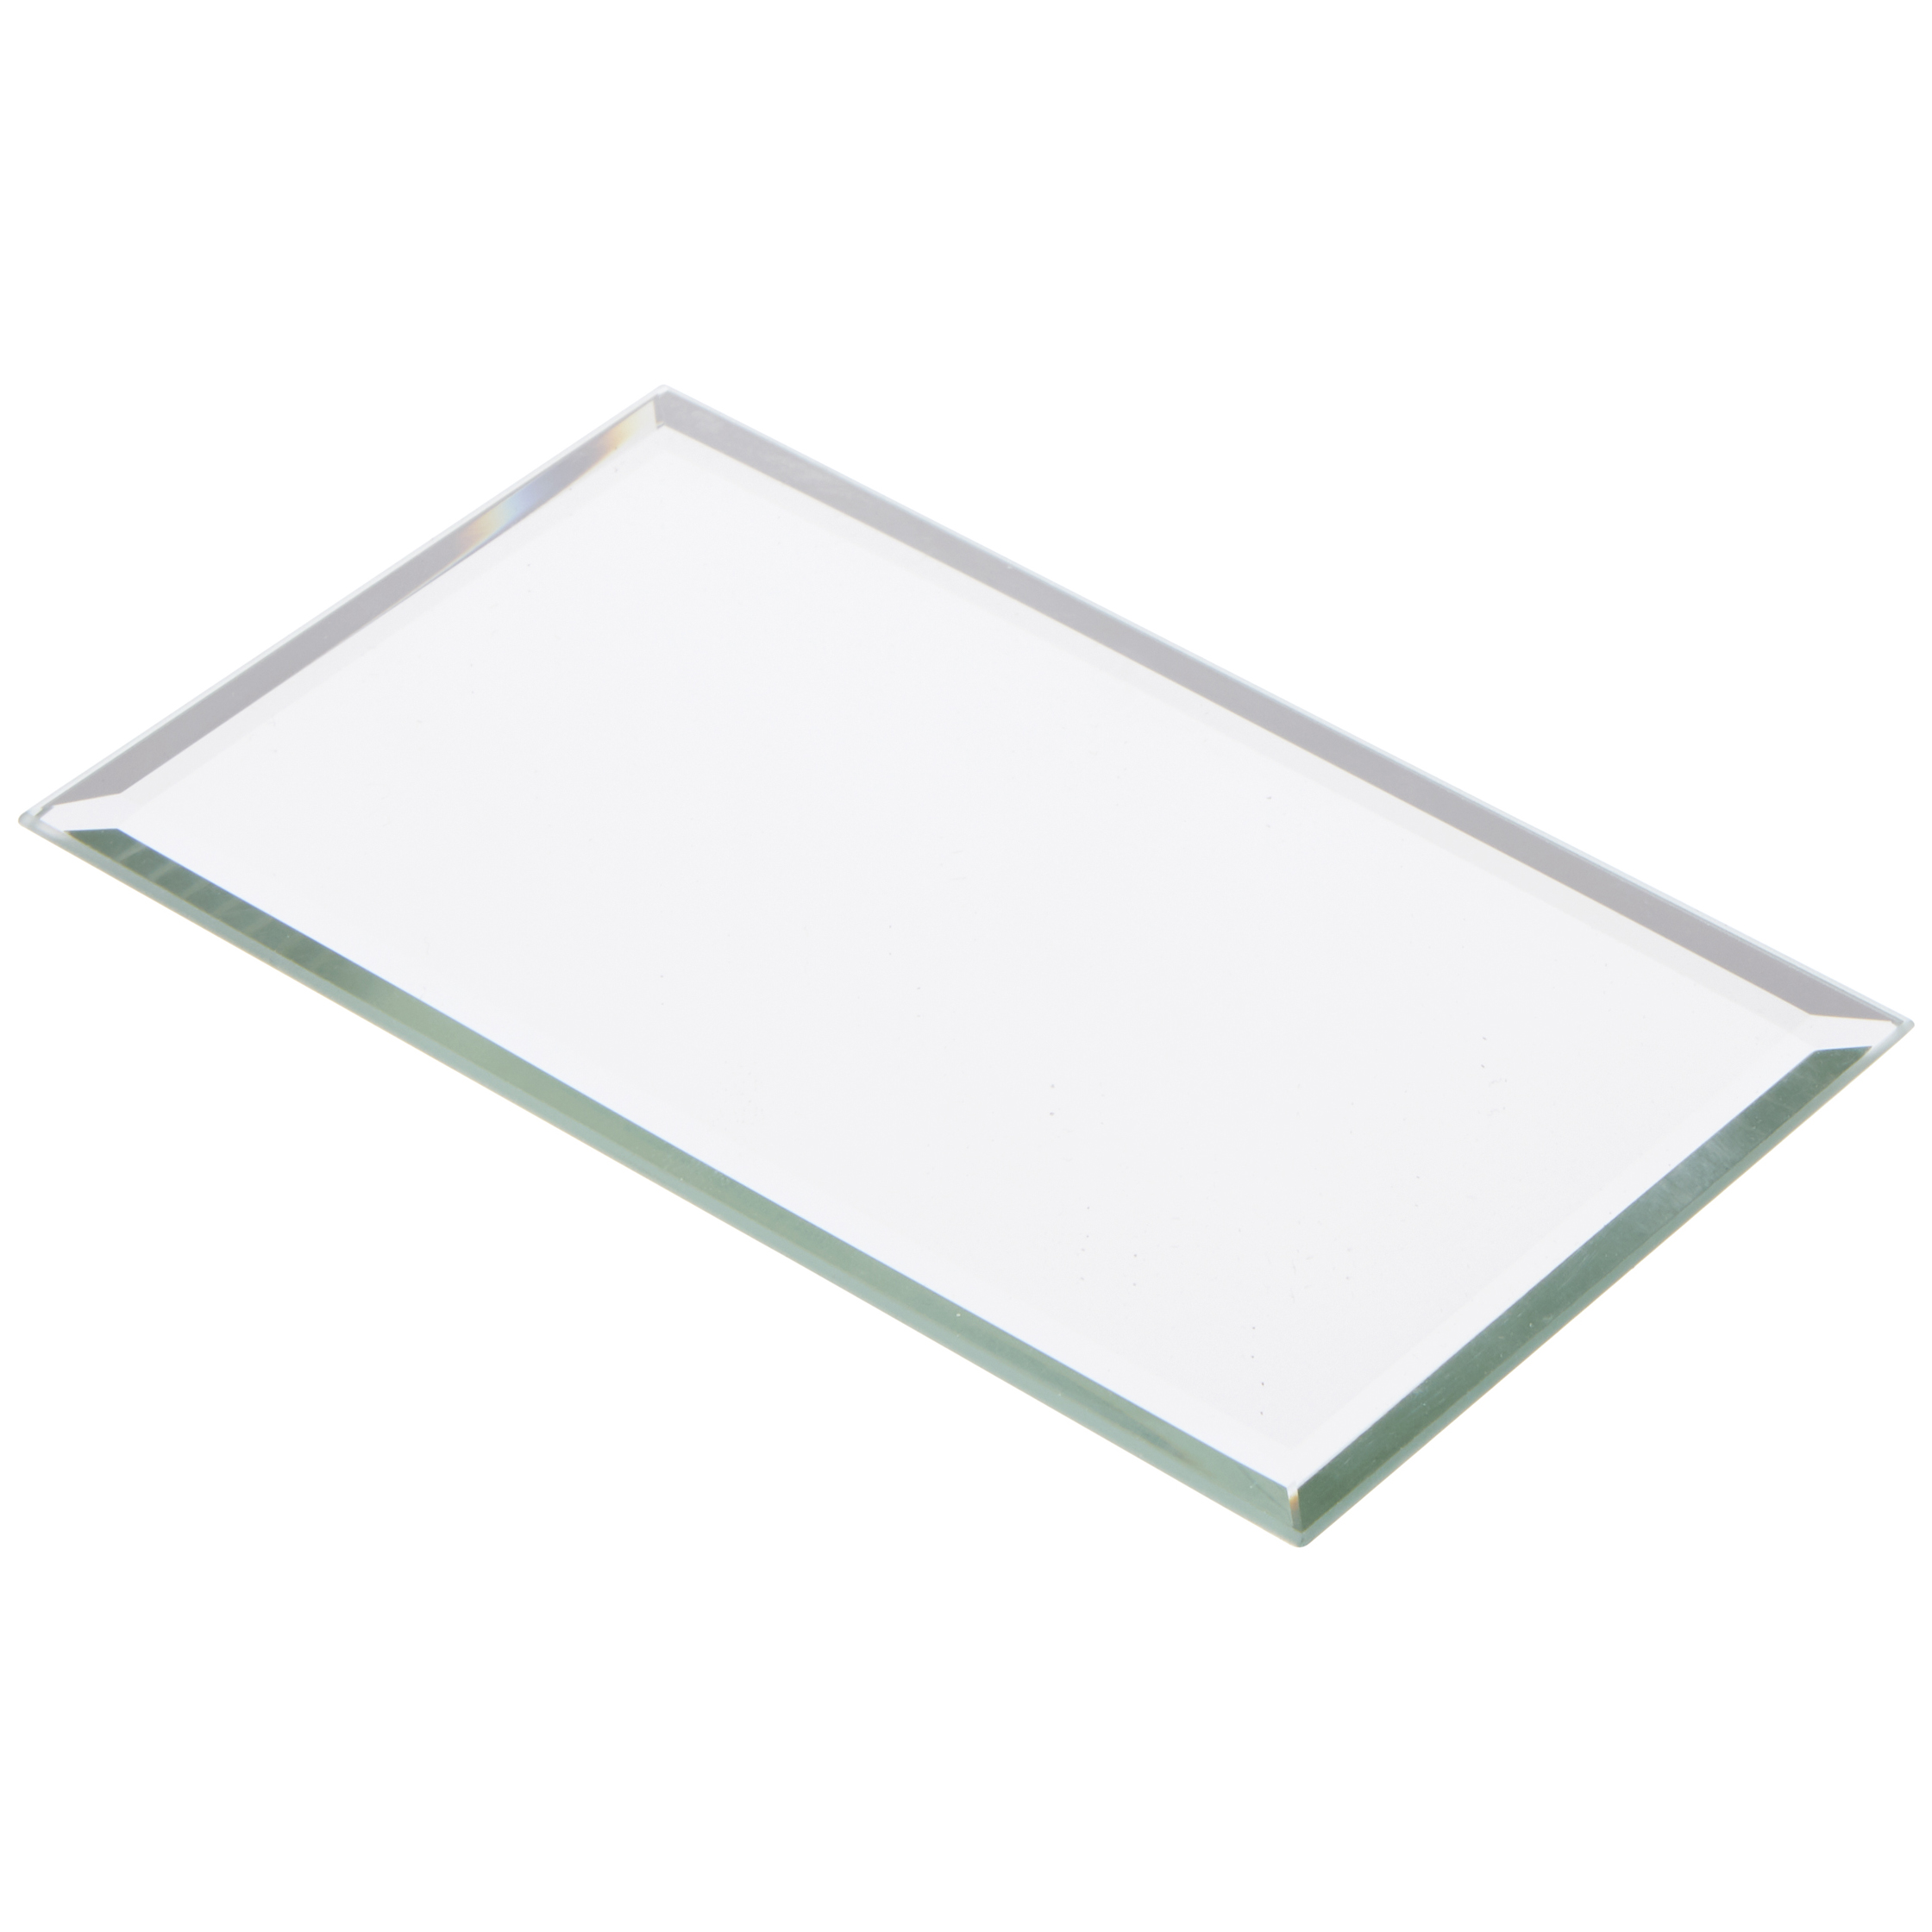 2 inch x 3 inch Pack of 24 Plymor Rectangle 3mm Beveled Glass Mirror 